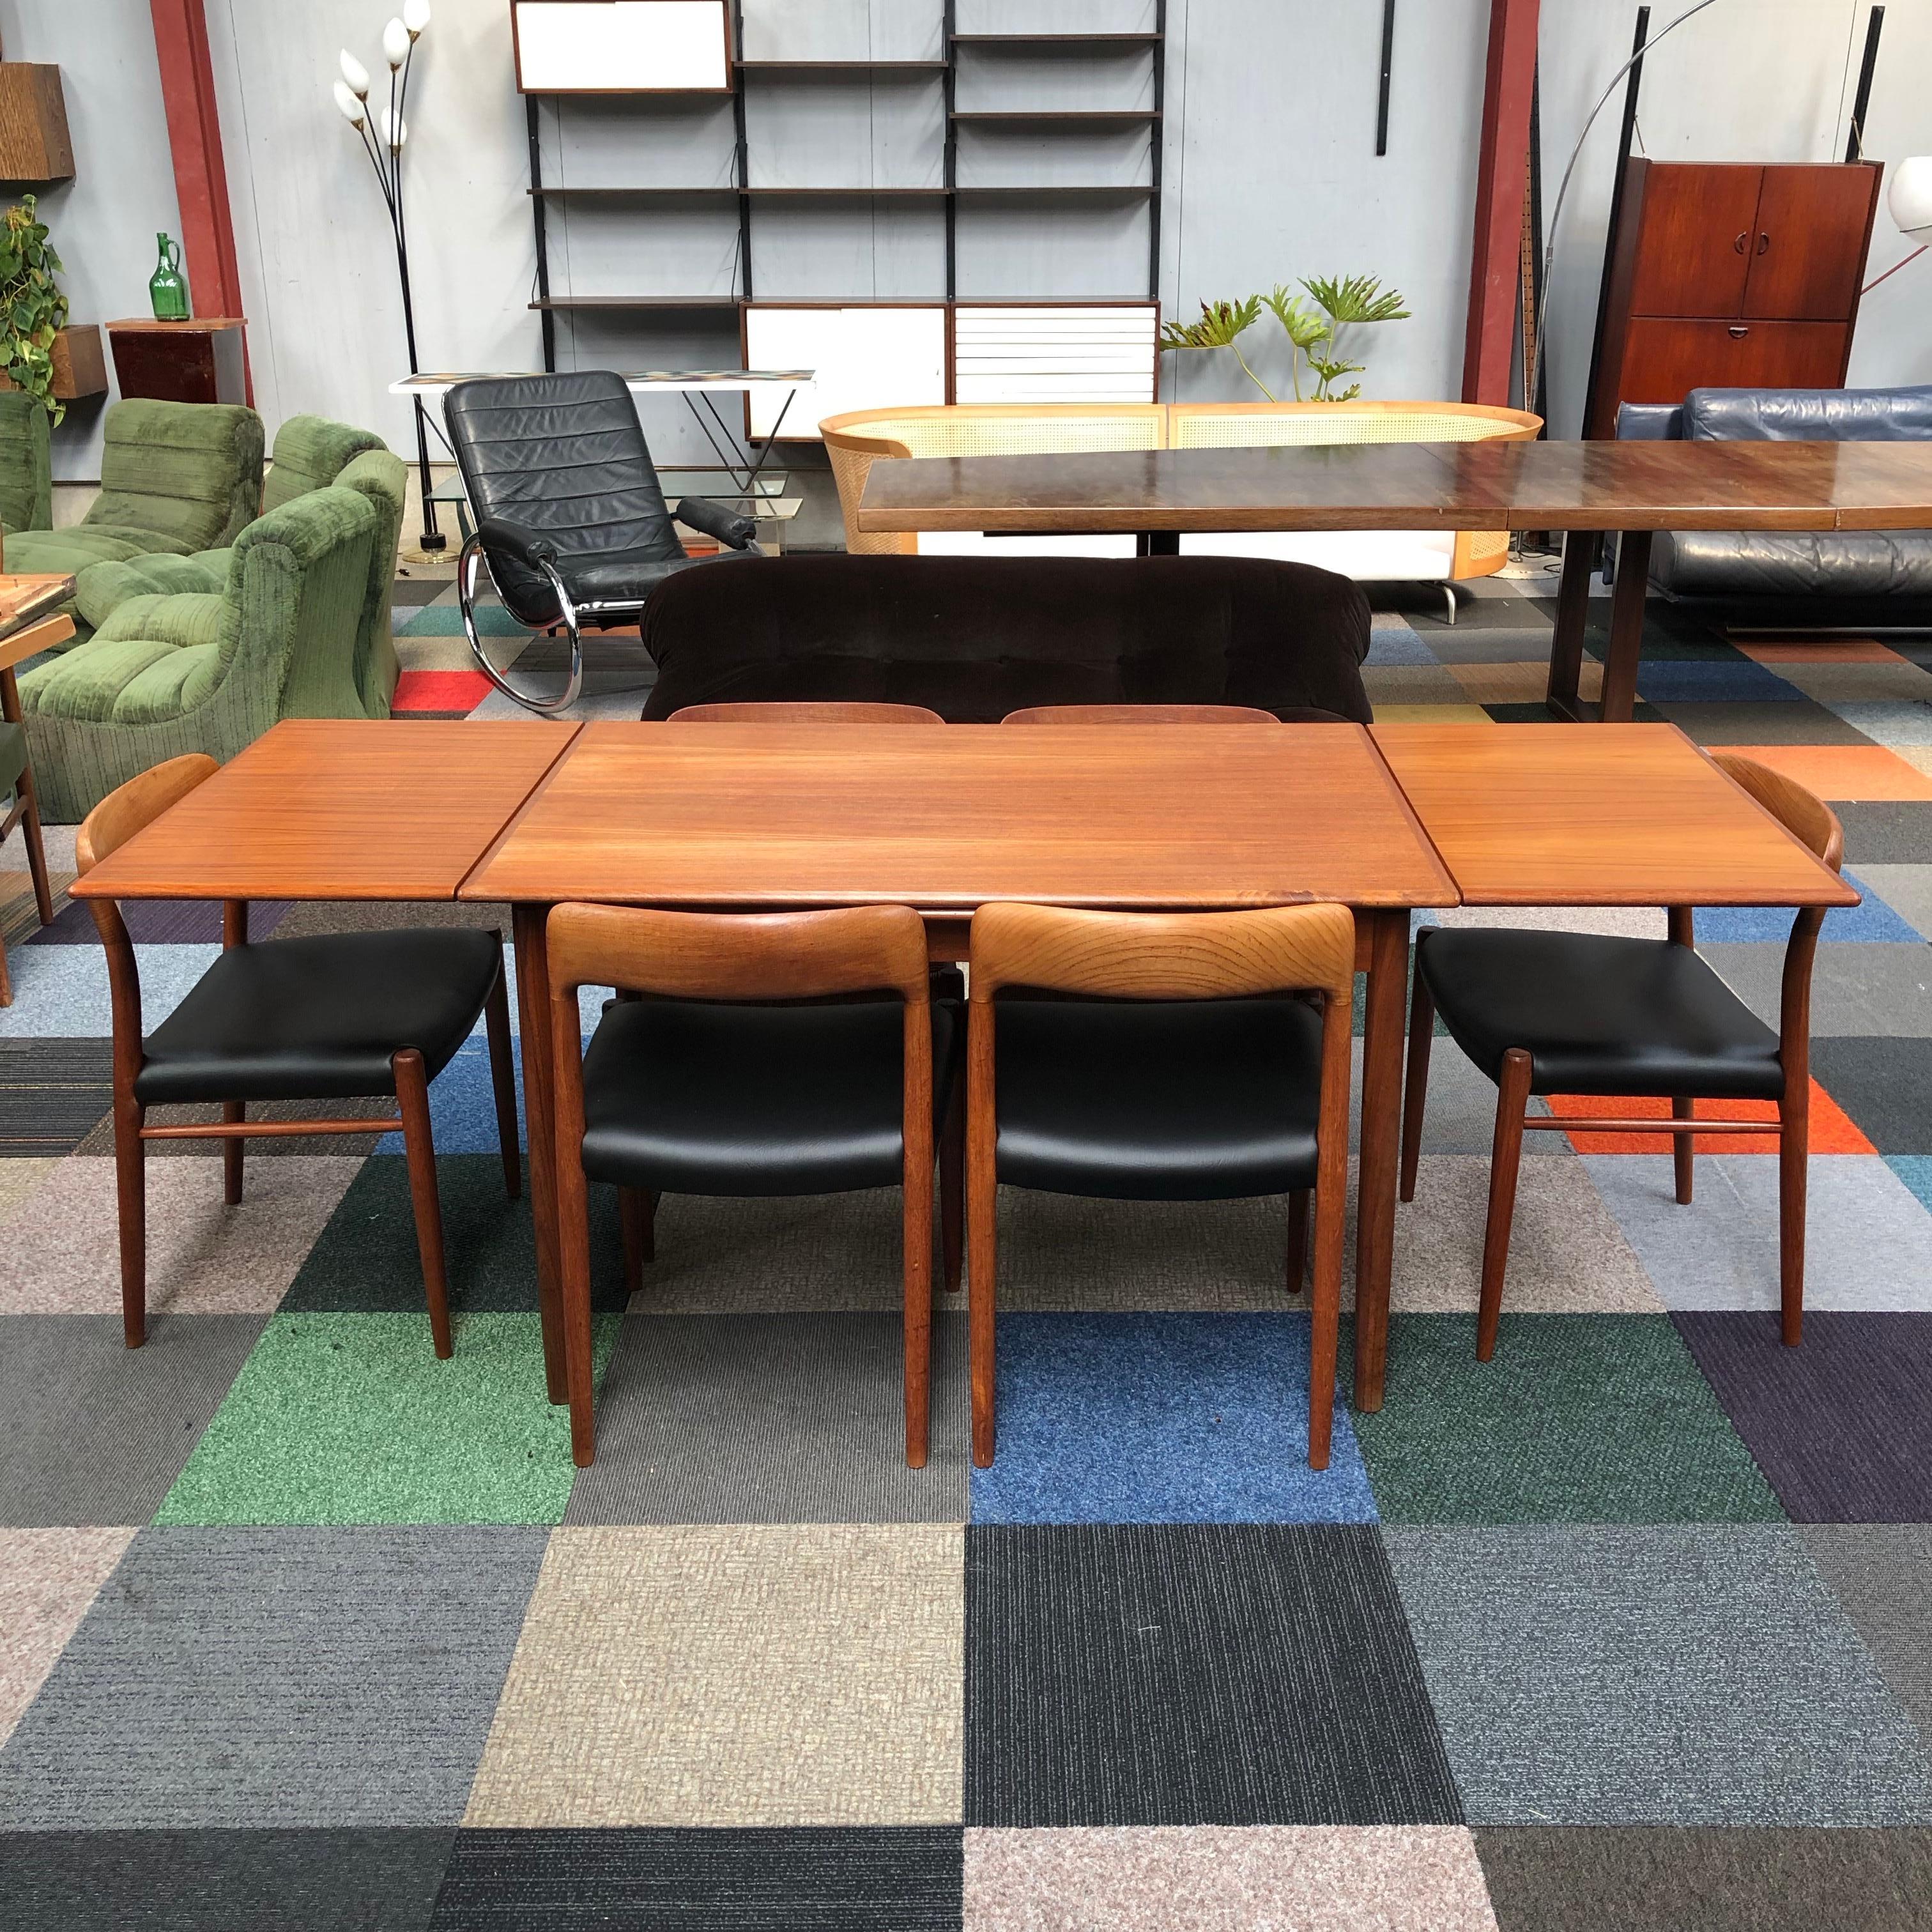 Extendable Niels Møller teak dining table with six Niels Møller model 75 Teak chairs.
The chairs have been re-upholstered with black faux leather (as originally also done).
The top of the table has been refinished.

Manufactured by the J.L.